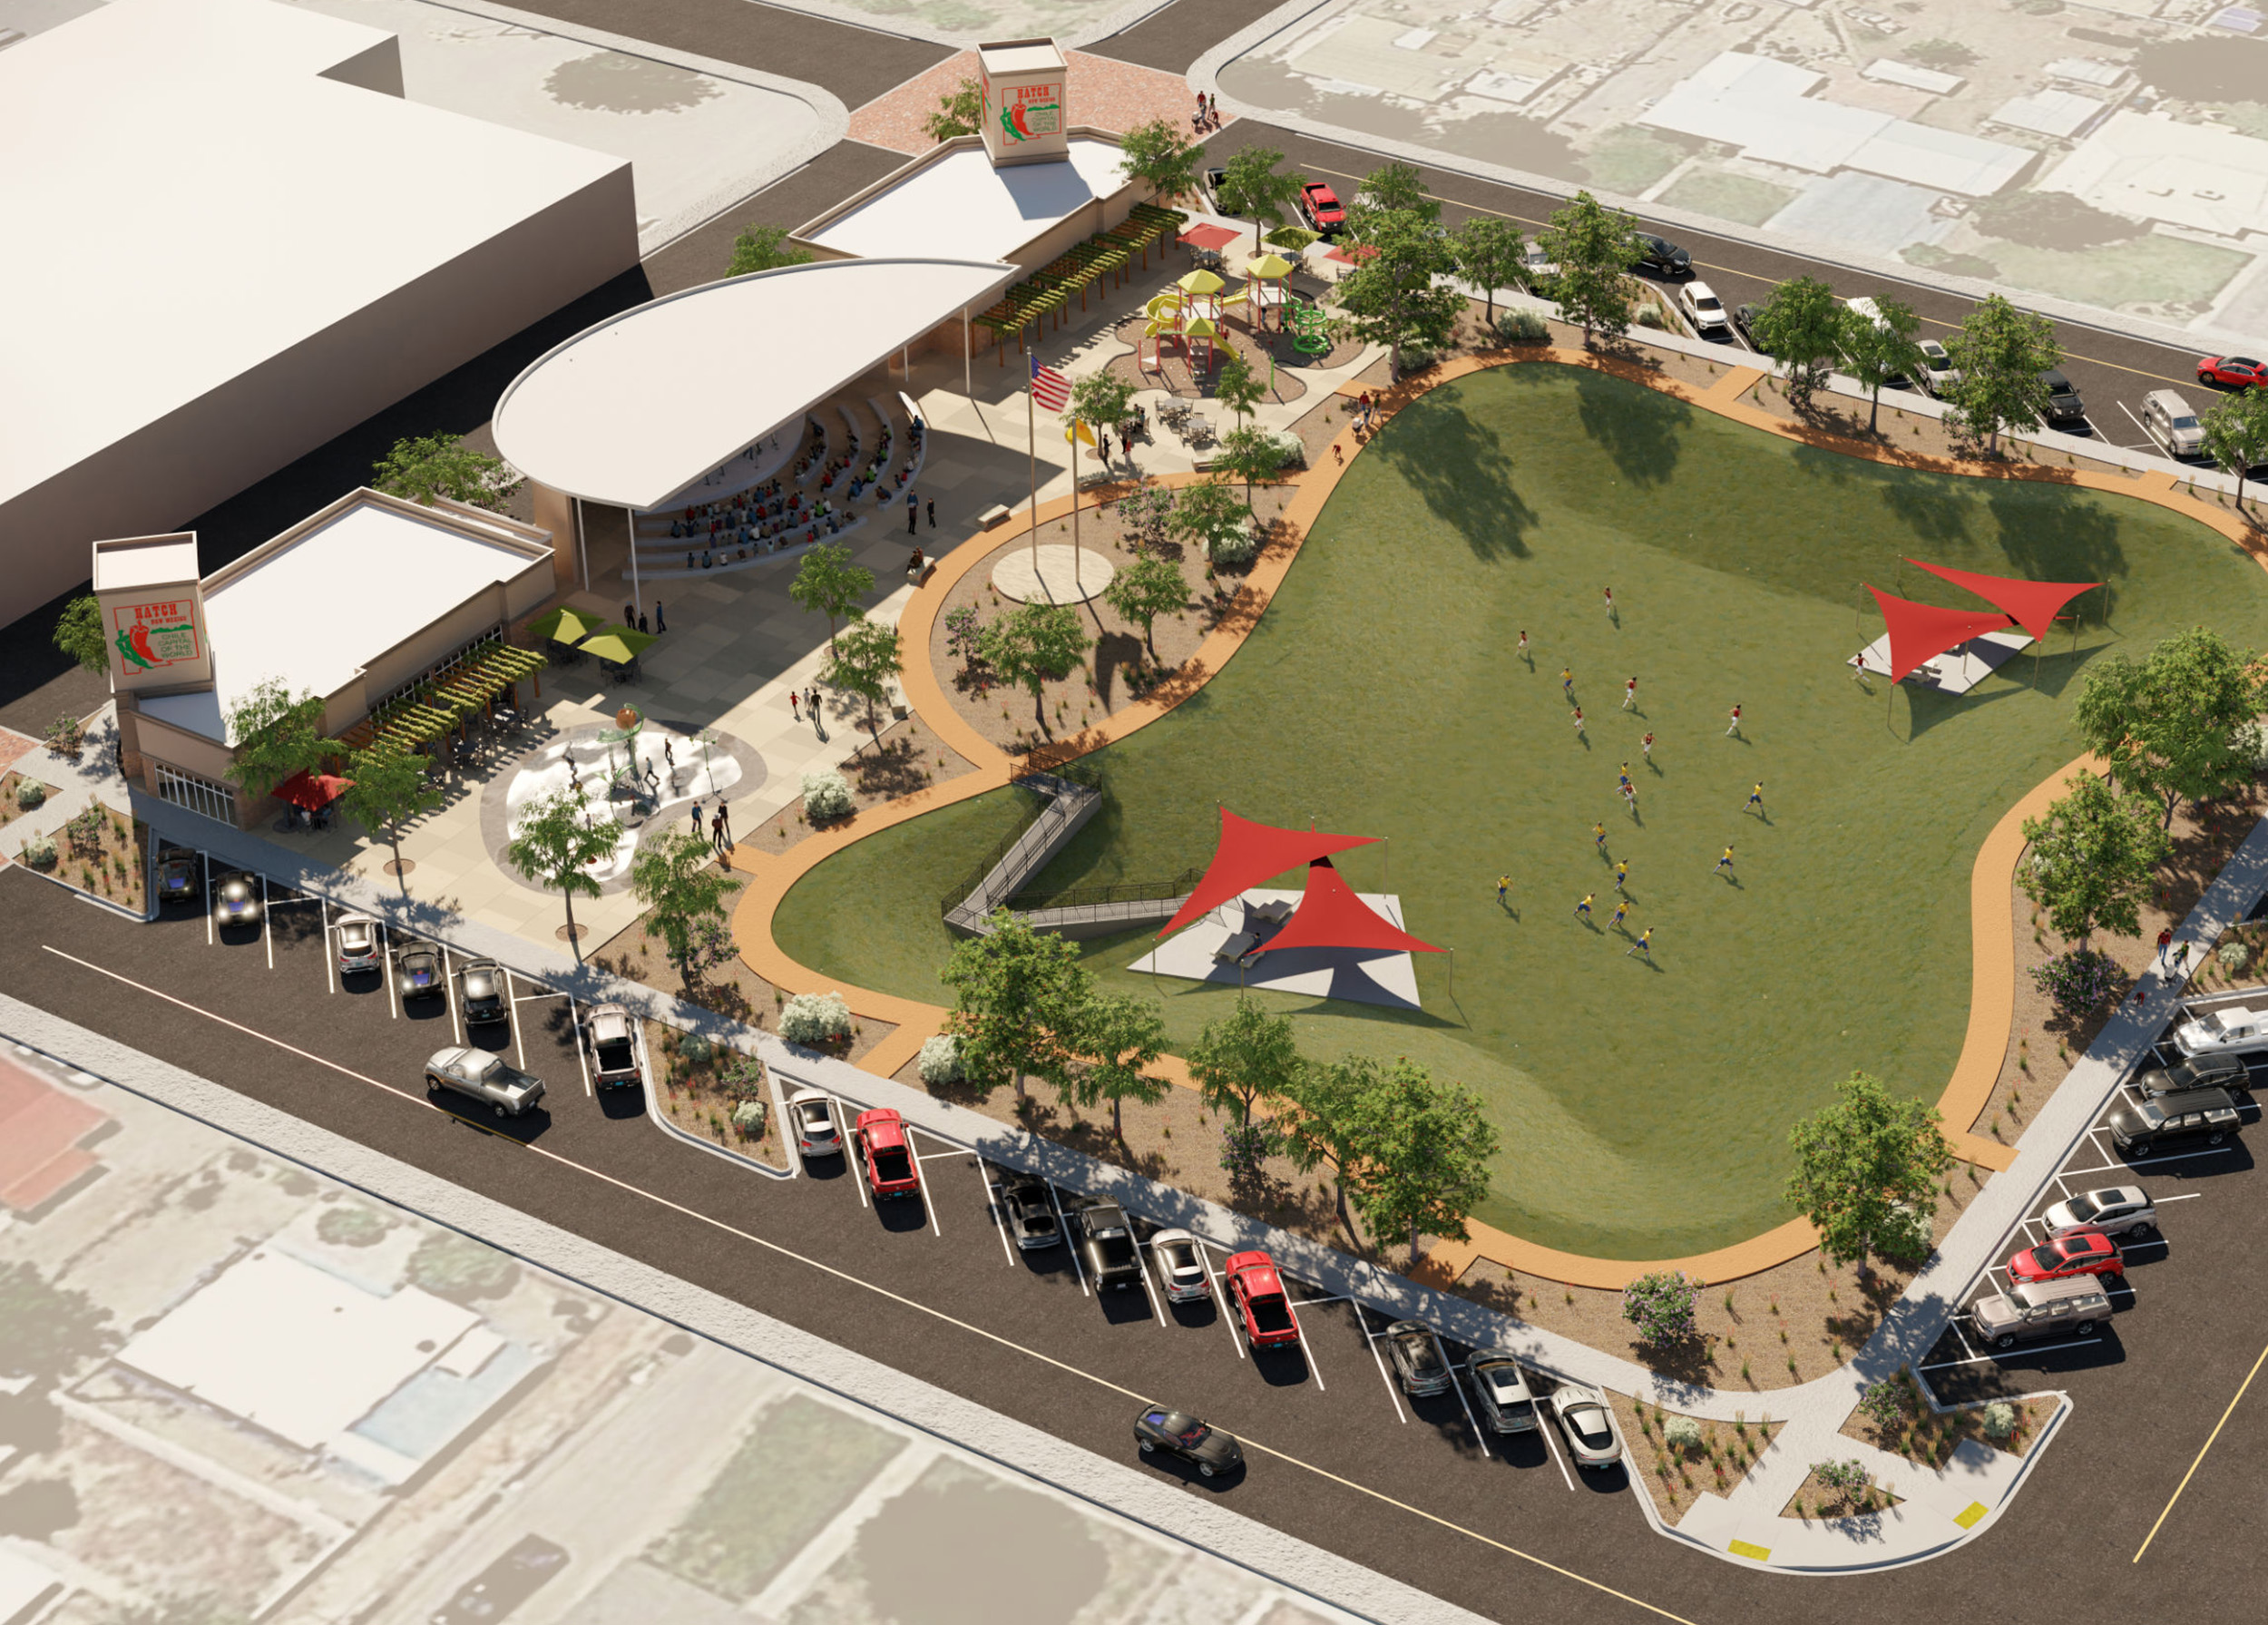 The planned features of the Complex include an outdoor performance area, retail space, and splash pad, aim to provide amenities, create job opportunities, and foster economic development.